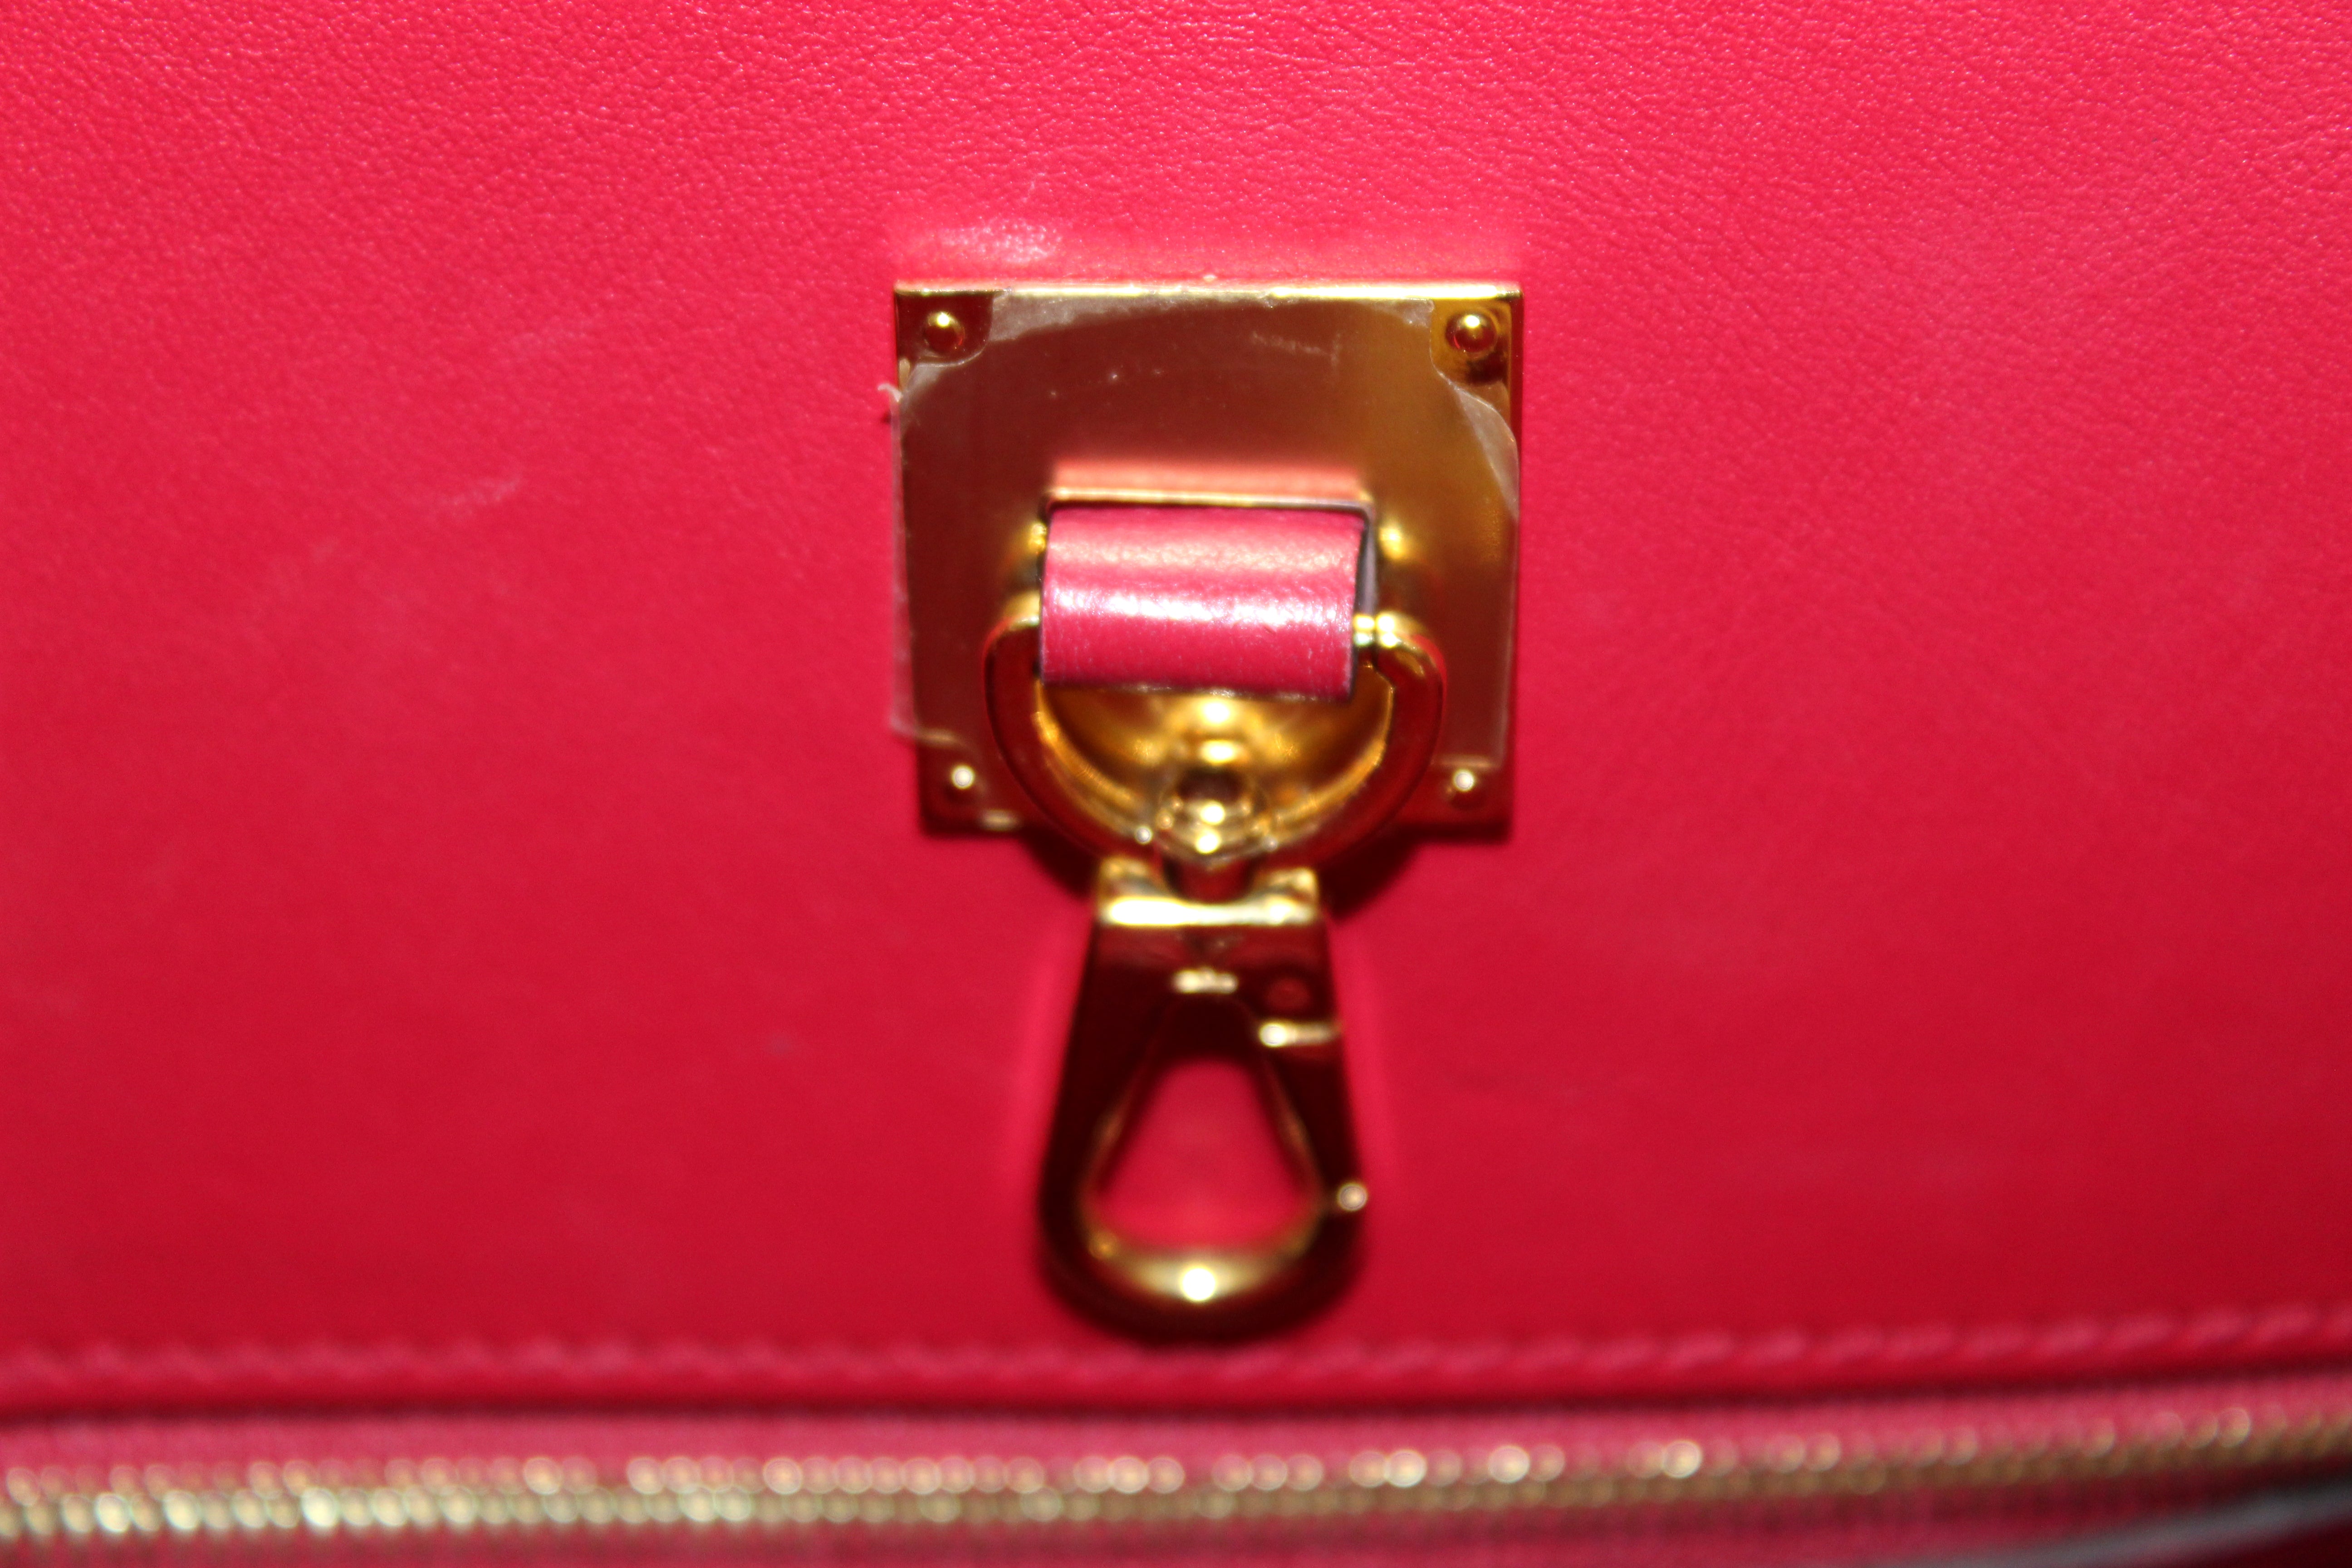 Milla bag in red leather Louis Vuitton - Second Hand / Used – Vintega